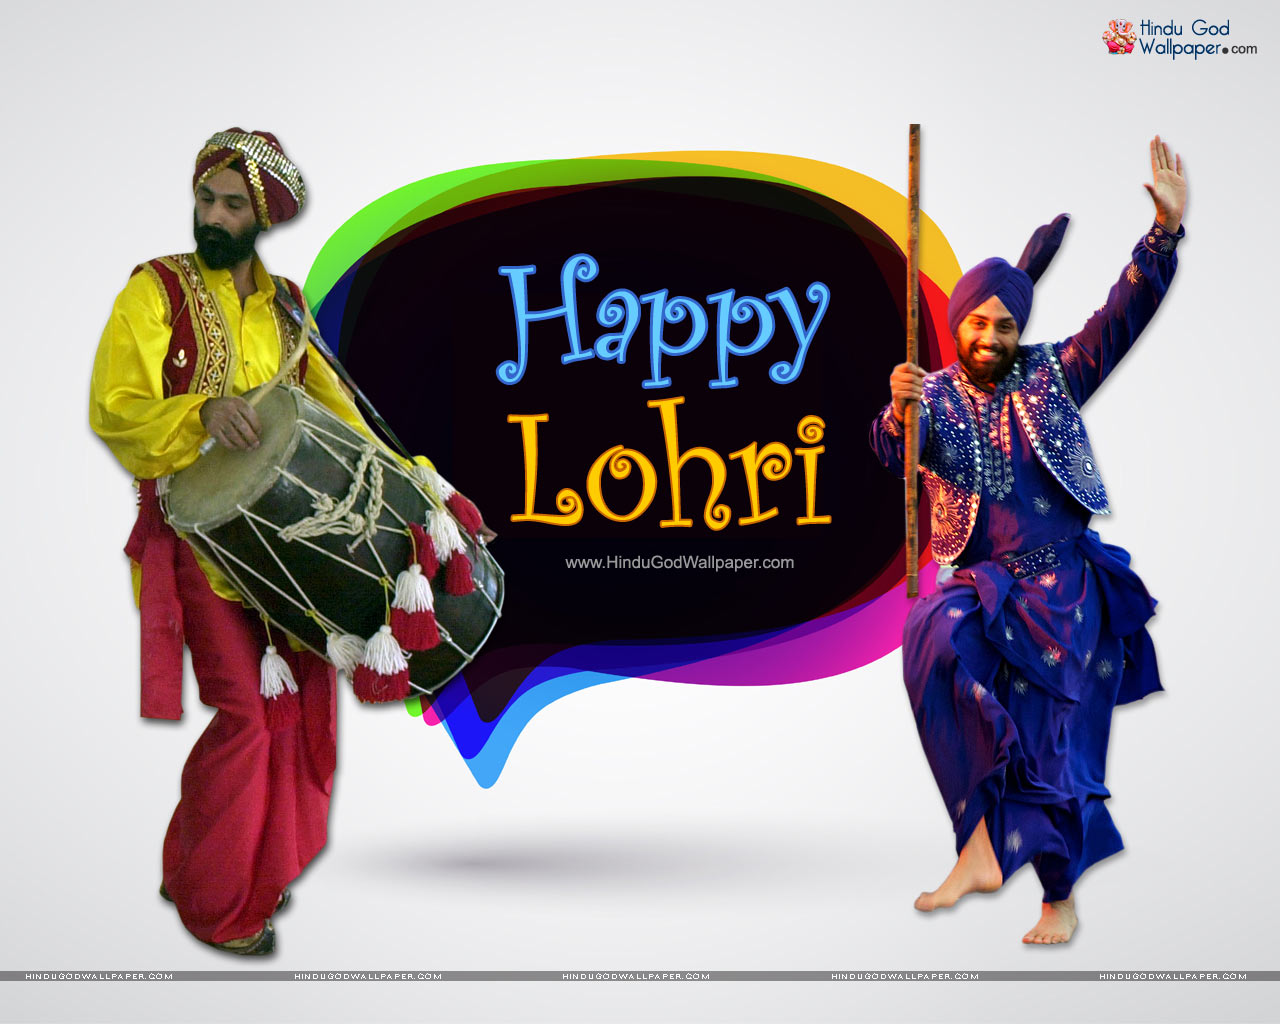 Happy Lohri Wishes Images, Wallpapers & Pictures Download